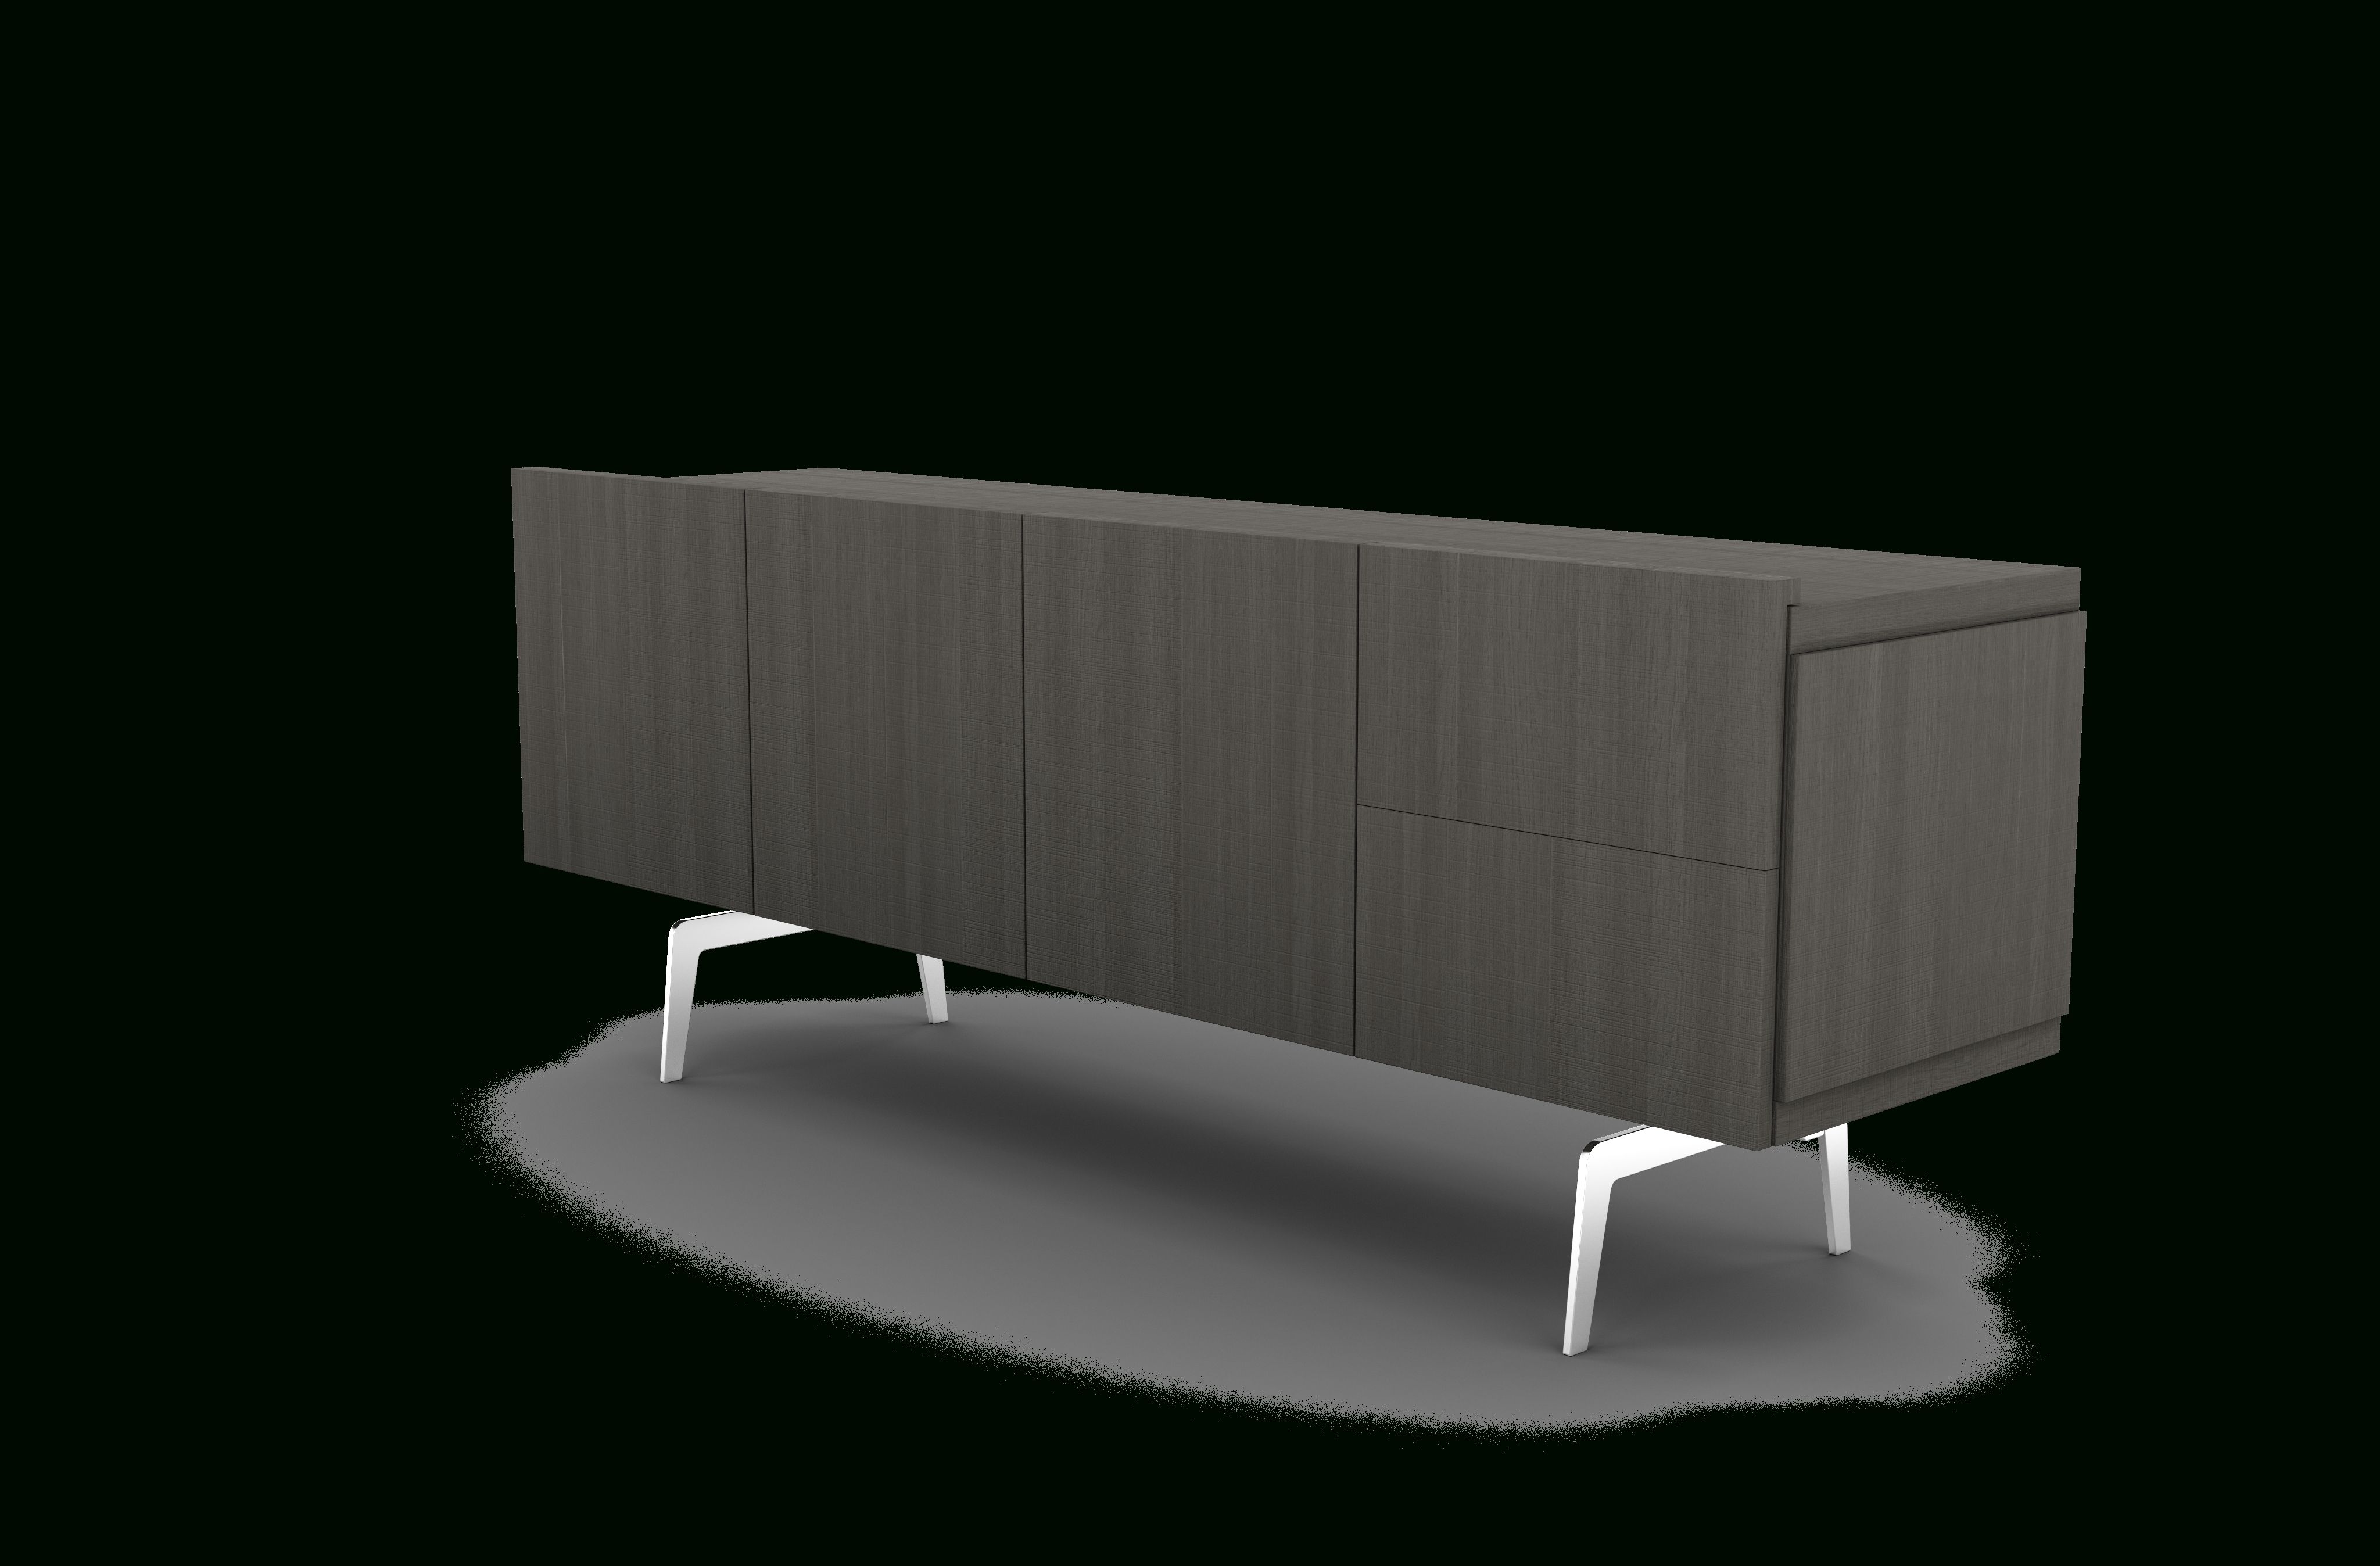 Mixte Living Room, Sideboards From Designer : Mauro Lipparini With Regard To 4 Door Wood Squares Sideboards (View 7 of 30)